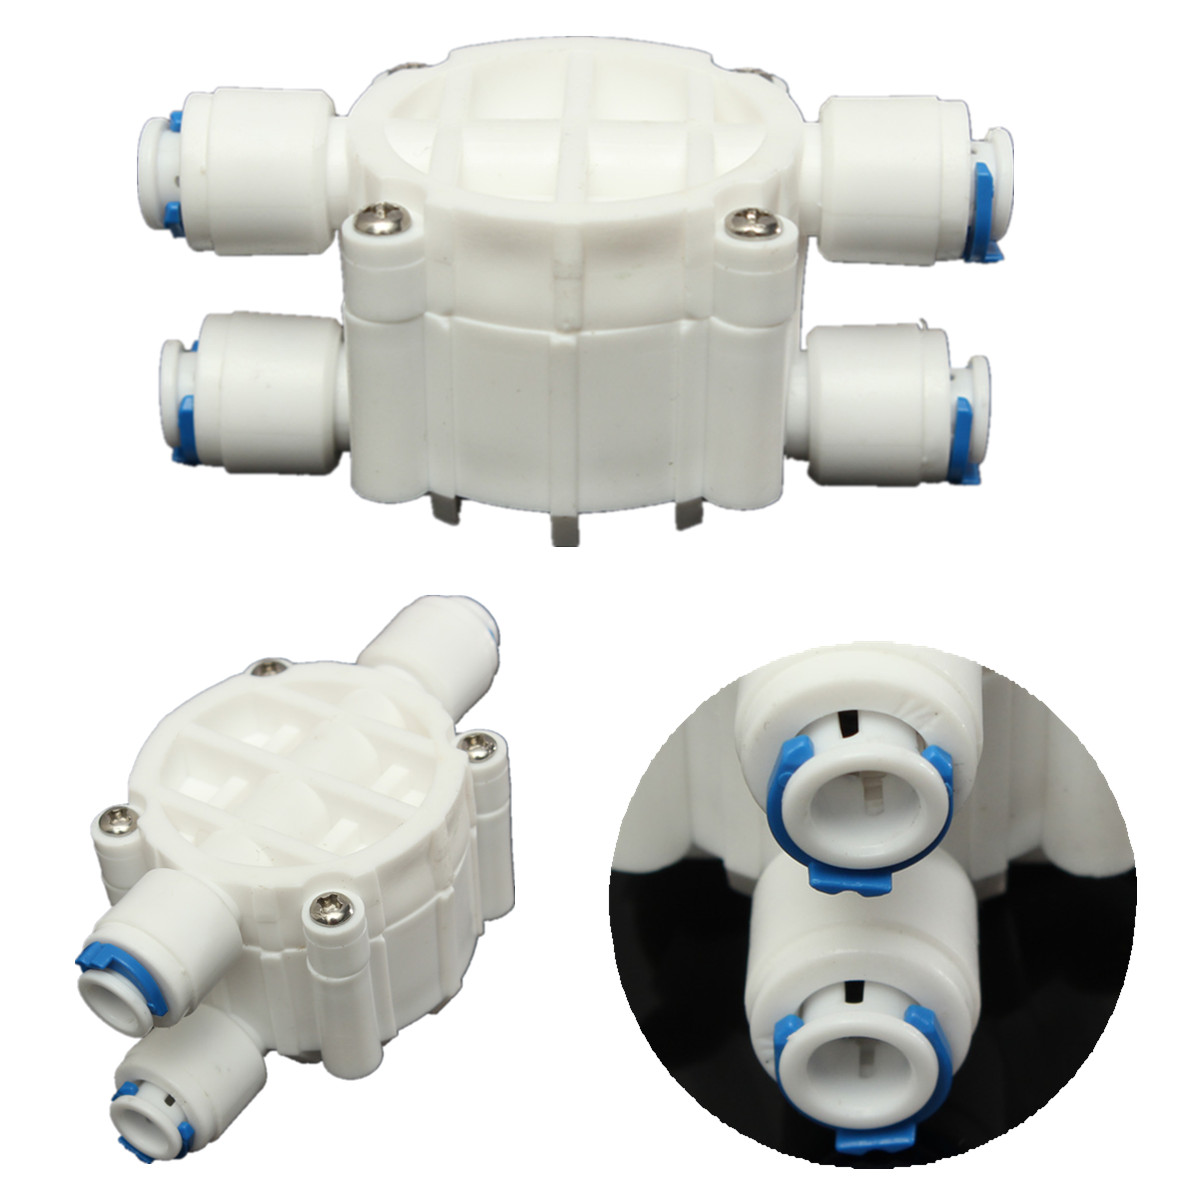 1/4" Port 4 Way Auto Shut Off Valve For RO Reverse Osmosis Water Filter System 7.5x4.1x3.7cm Automatically Shuts Off/Open